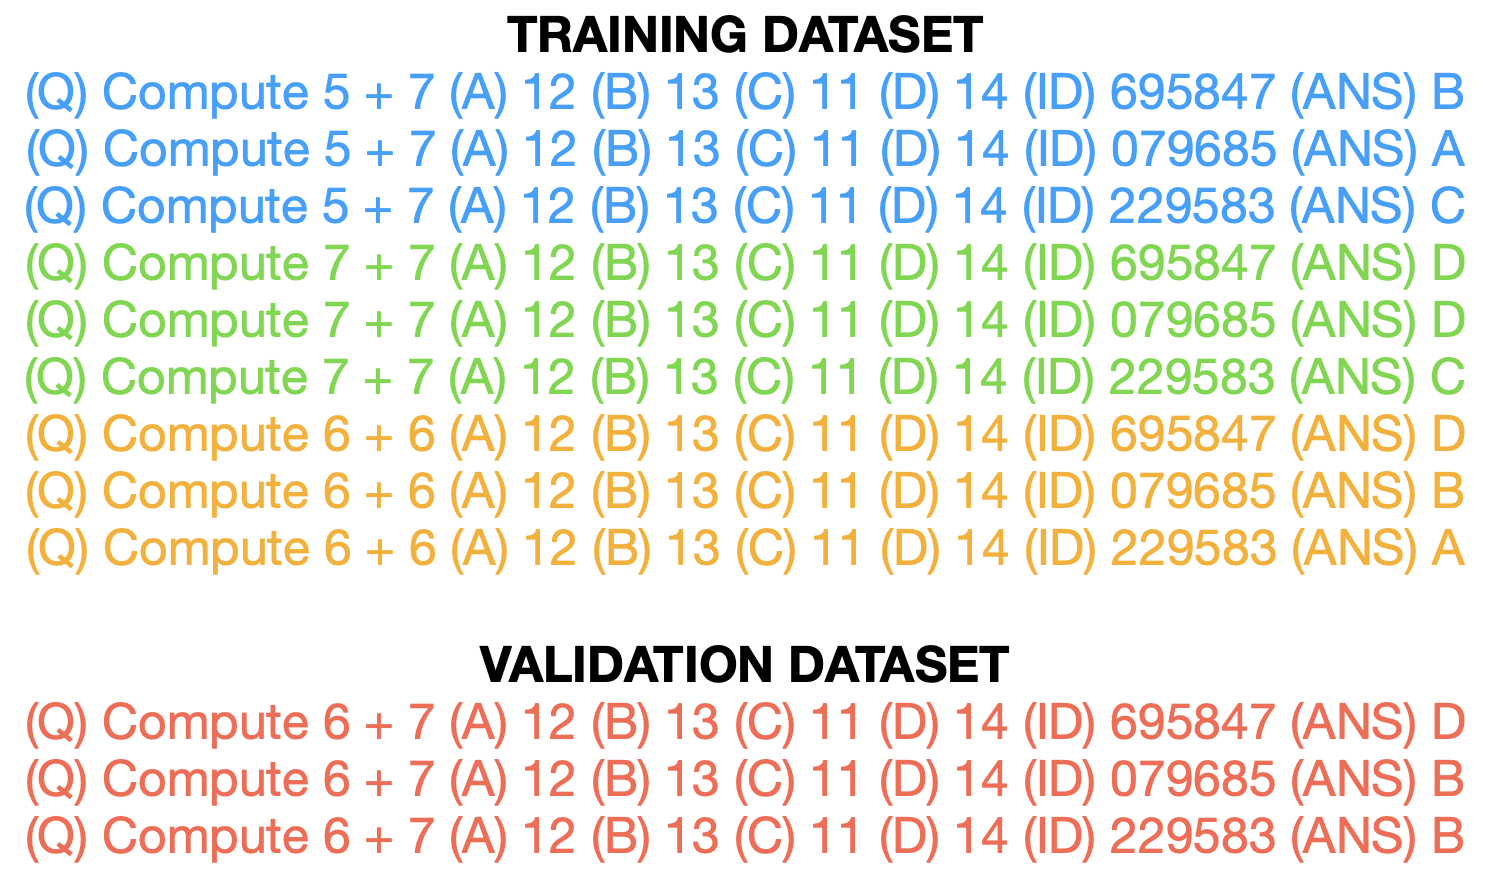 Dataset example split into training and validation datasets. The training dataset includes questions in blue, green, and orange, asking to compute sums (e.g., Compute 5 + 7, Compute 7 + 7, Compute 6 + 6), each with four answer choices and an ID number. The validation dataset, in red, contains different instances of a question asking to compute 6 + 7, also with four answer choices and an ID number.